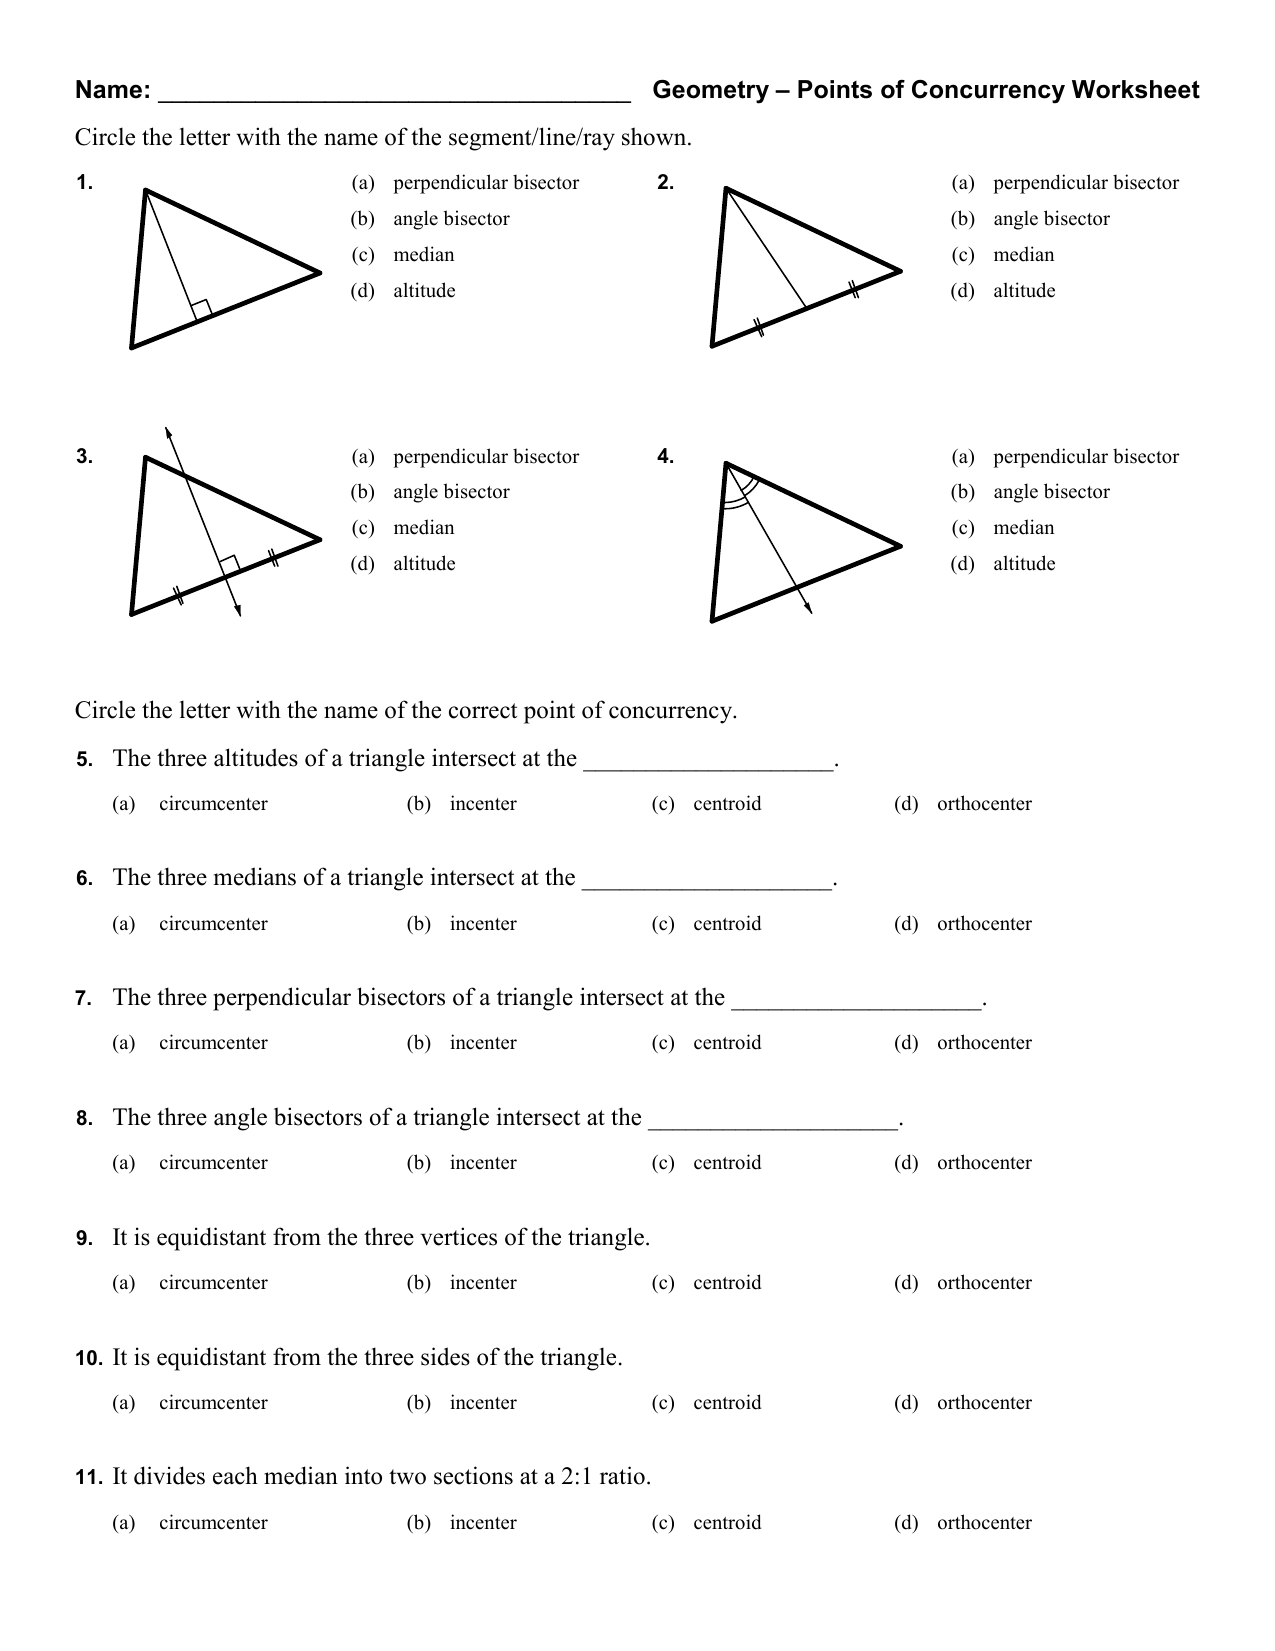 Geometry Points Of Concurrency Worksheet - Worksheet List Within Geometry Points Of Concurrency Worksheet